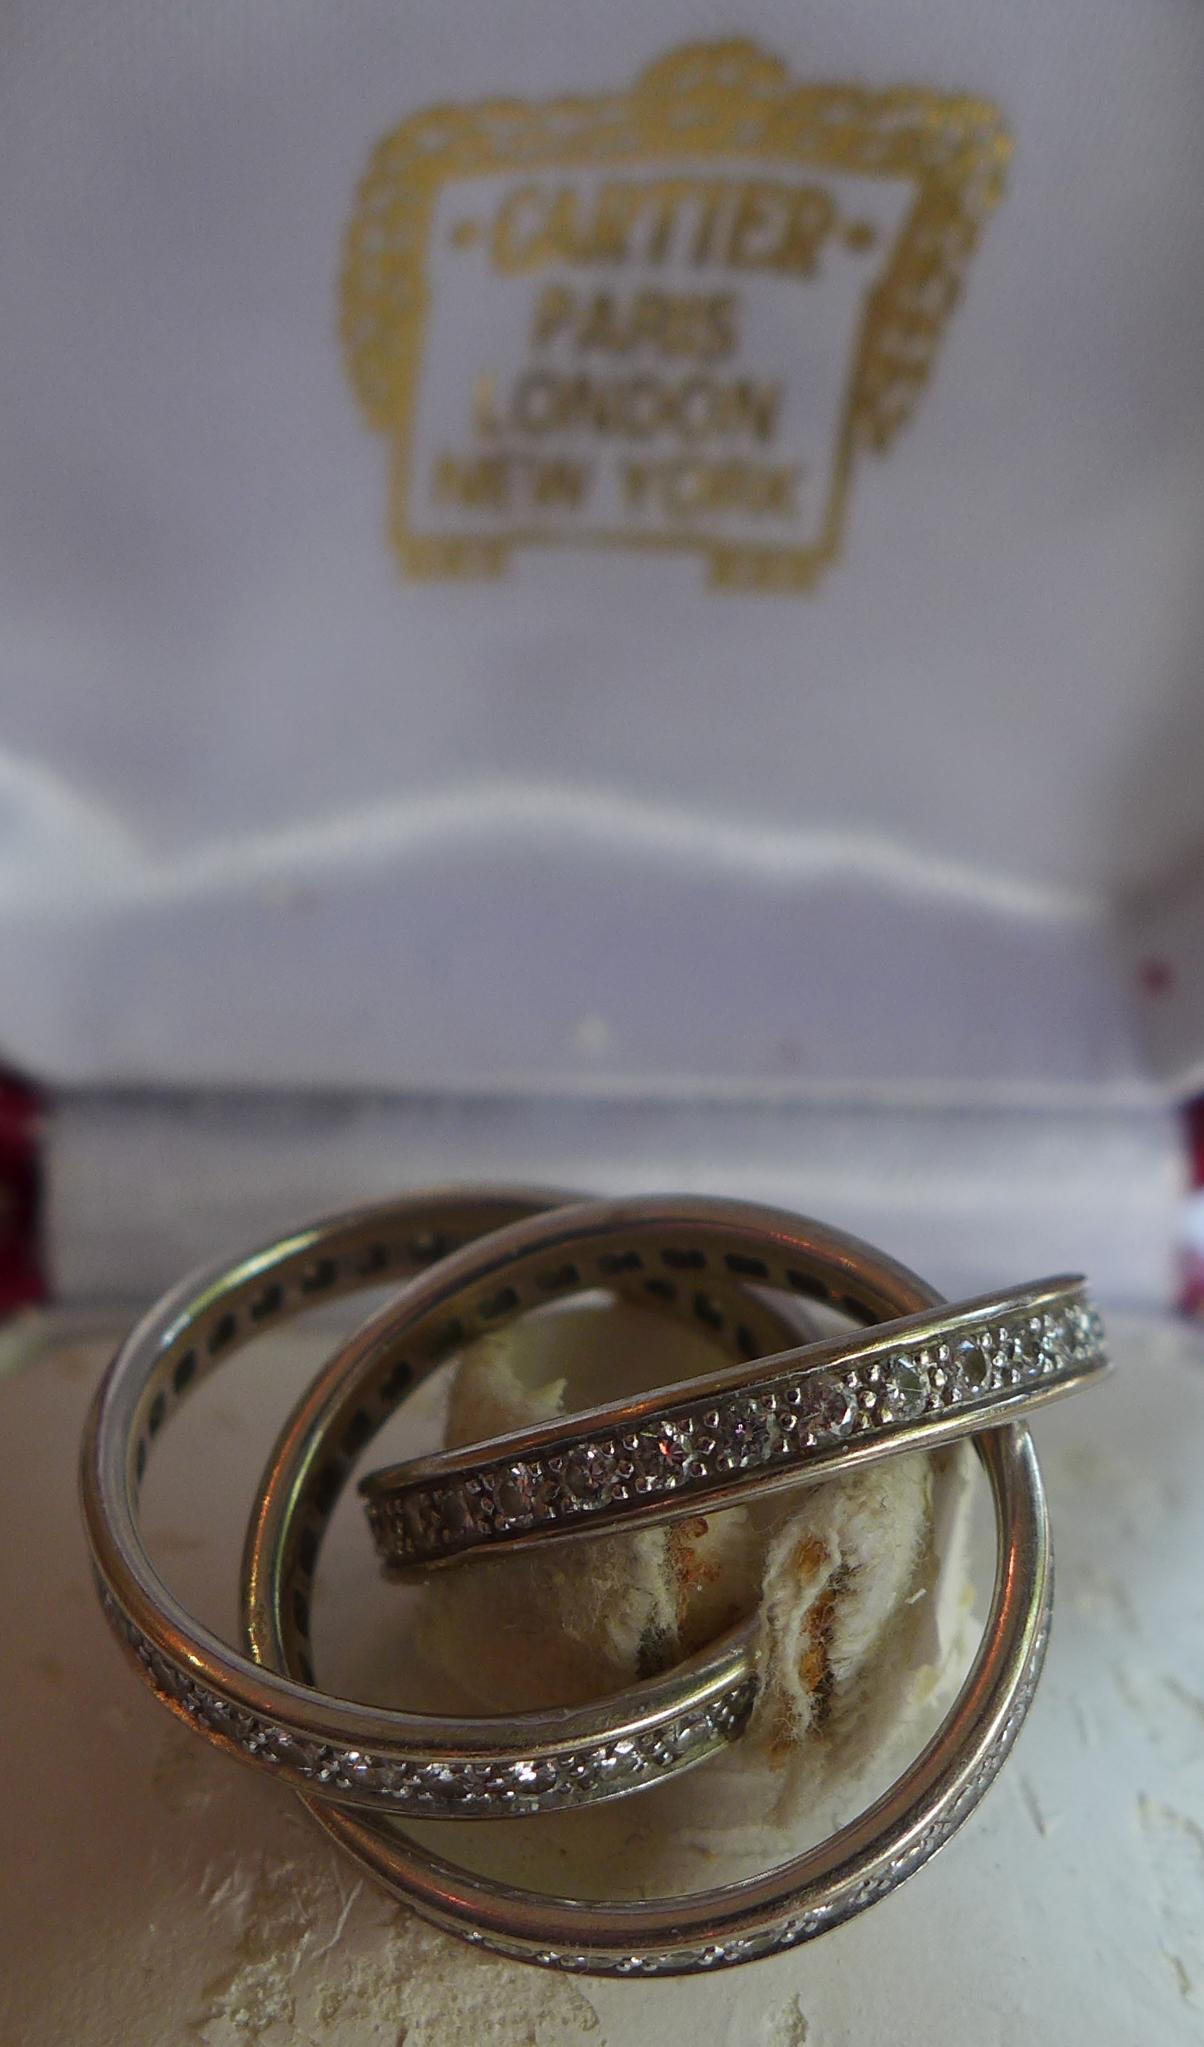 A Cartier 18ct white gold 'Trinity' ring, inset with diamonds, signed Cartier, stamped 750, serial - Image 2 of 2